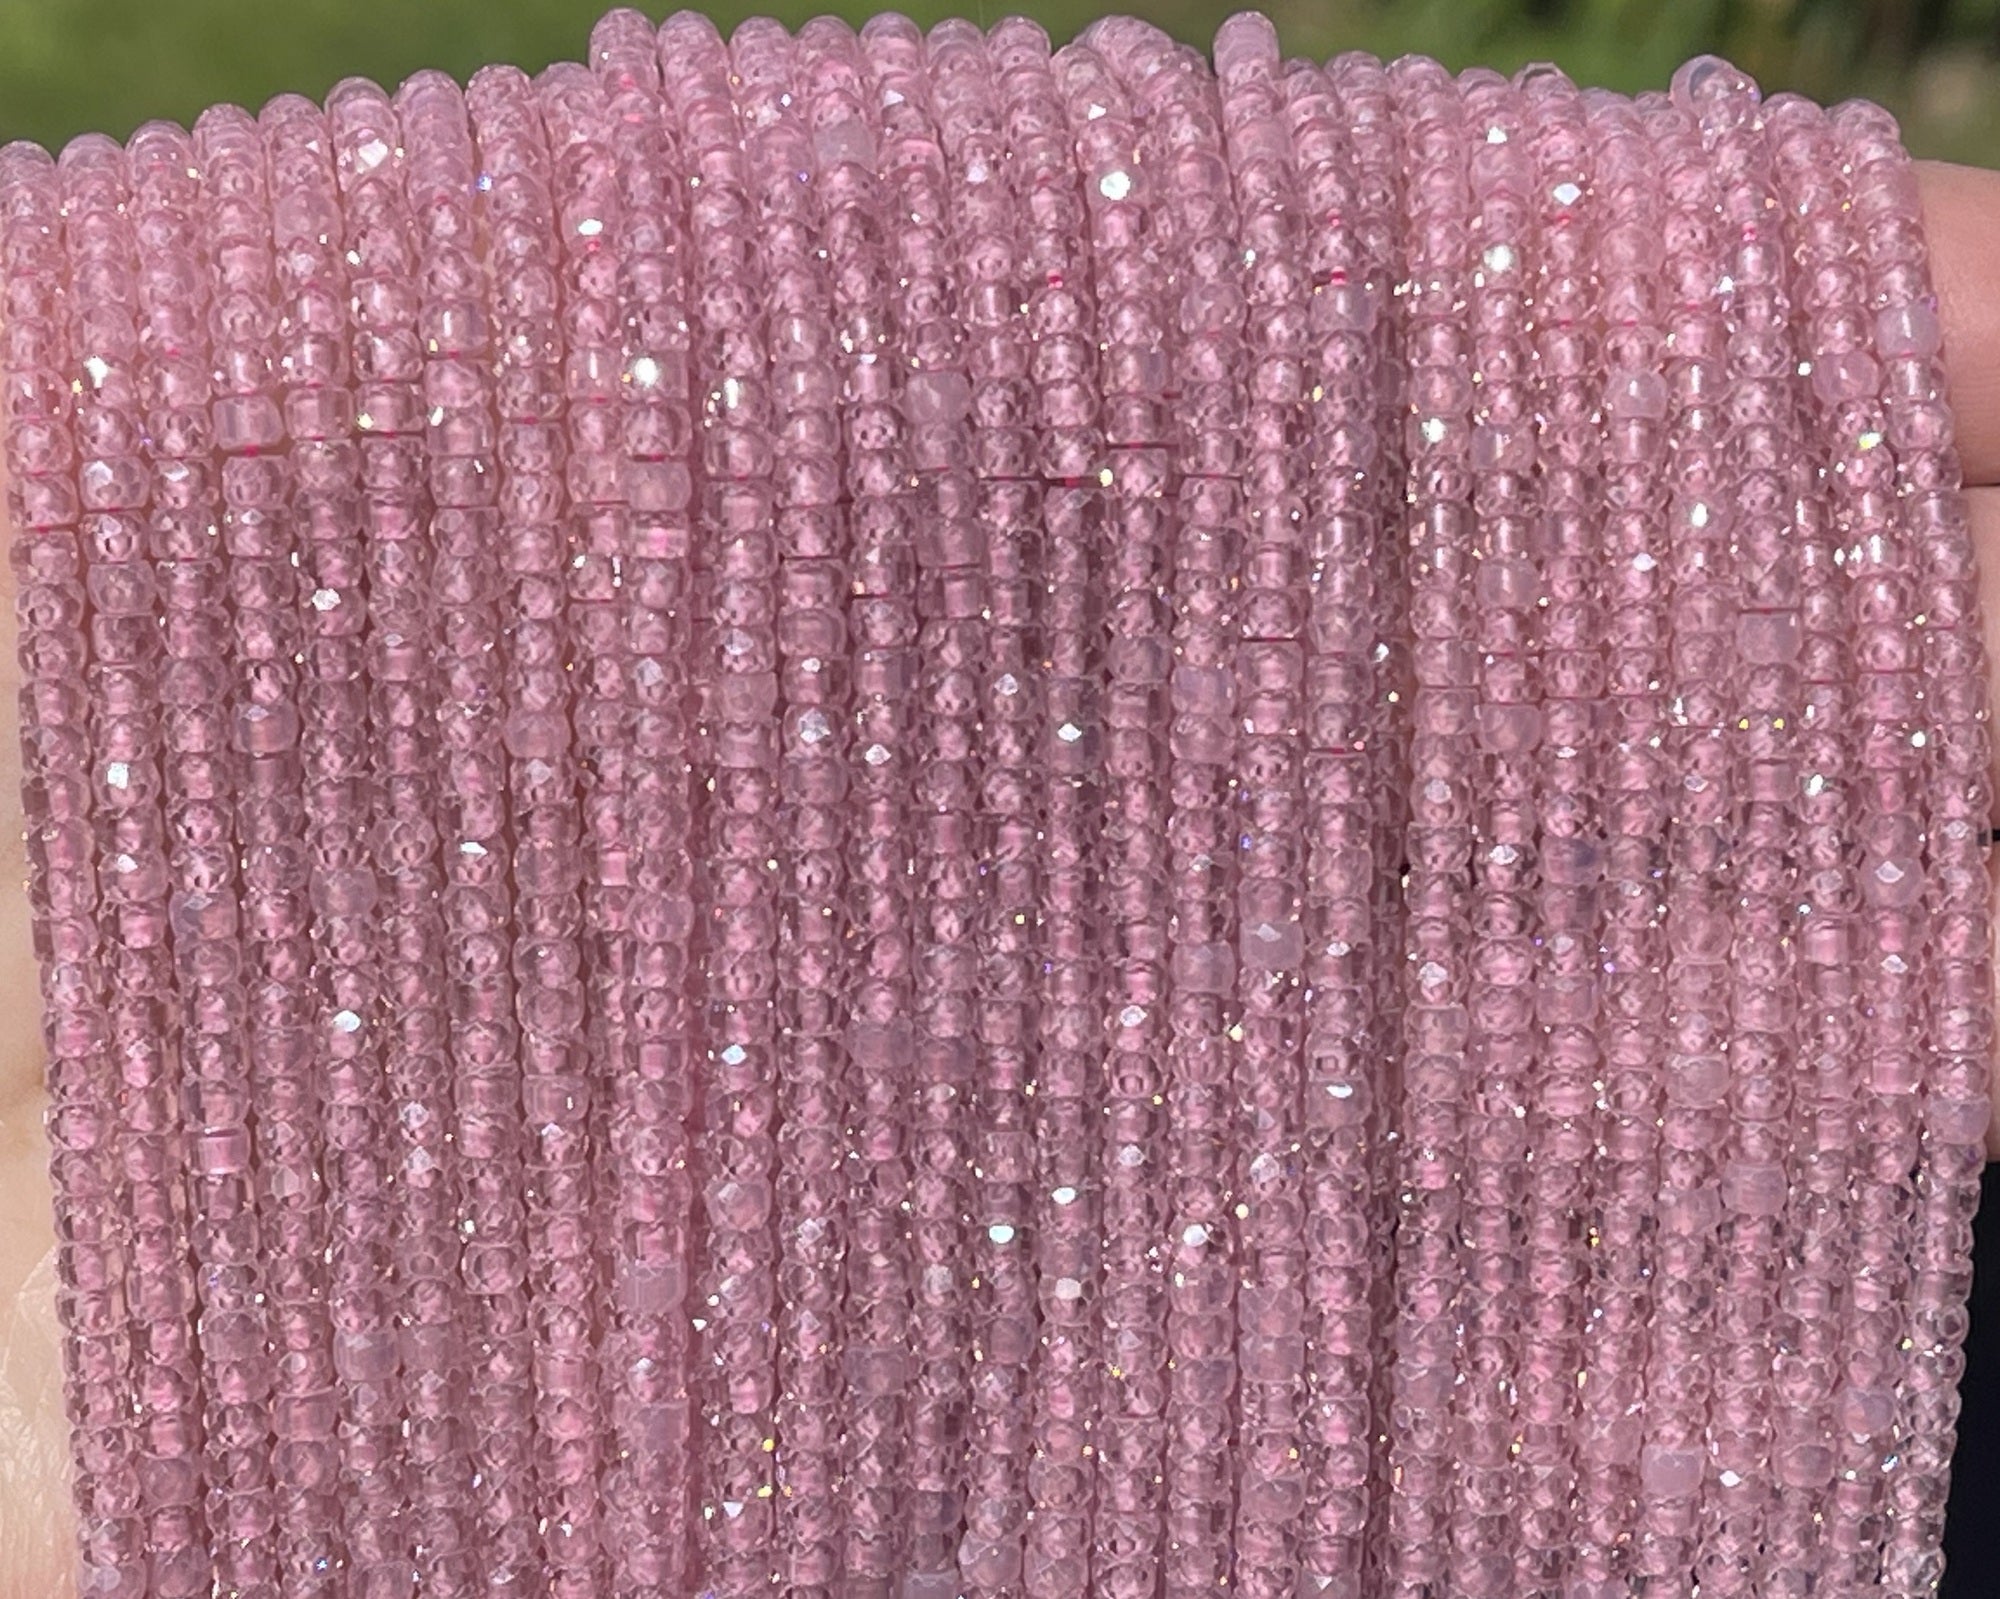 Pink Zircon 3x2mm rondelle micro faceted sparkling CZ beads 15" strand